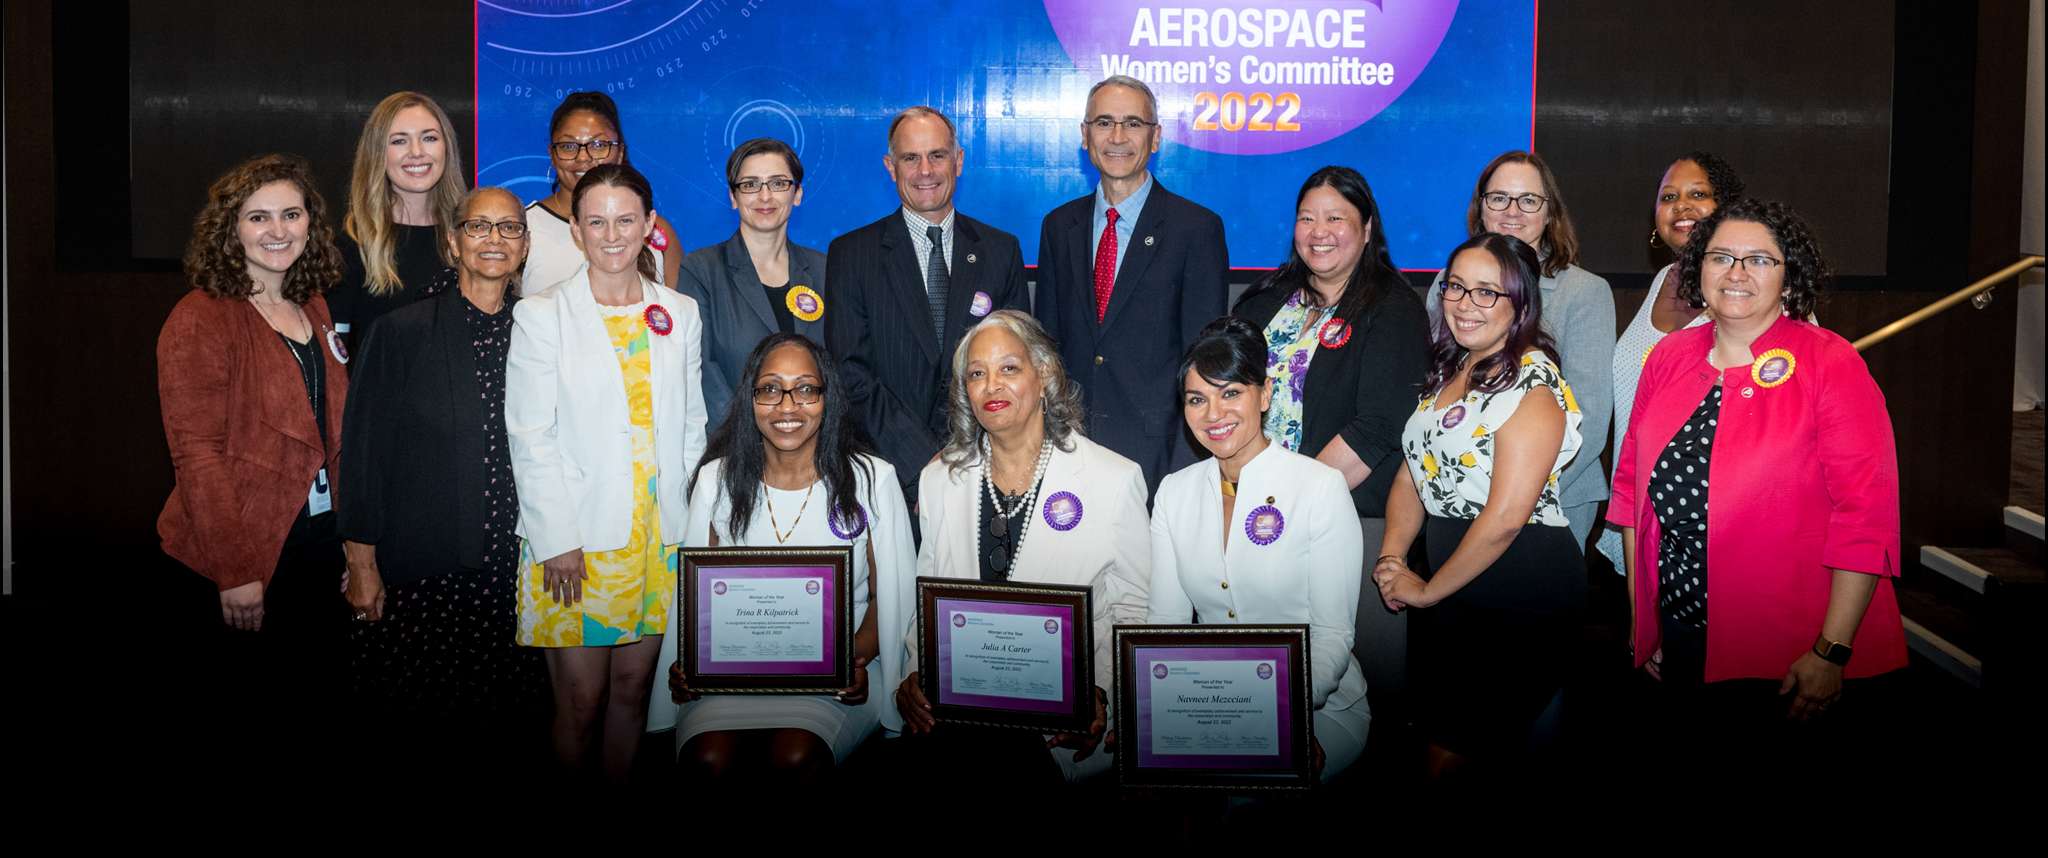 Our Employee Resource Groups exist to enhance Aerospace’s cultural awareness, provide career development opportunities, and promote diversity in the workplace. Four ERGs celebrated their 50th anniversaries that Aerospace this year.